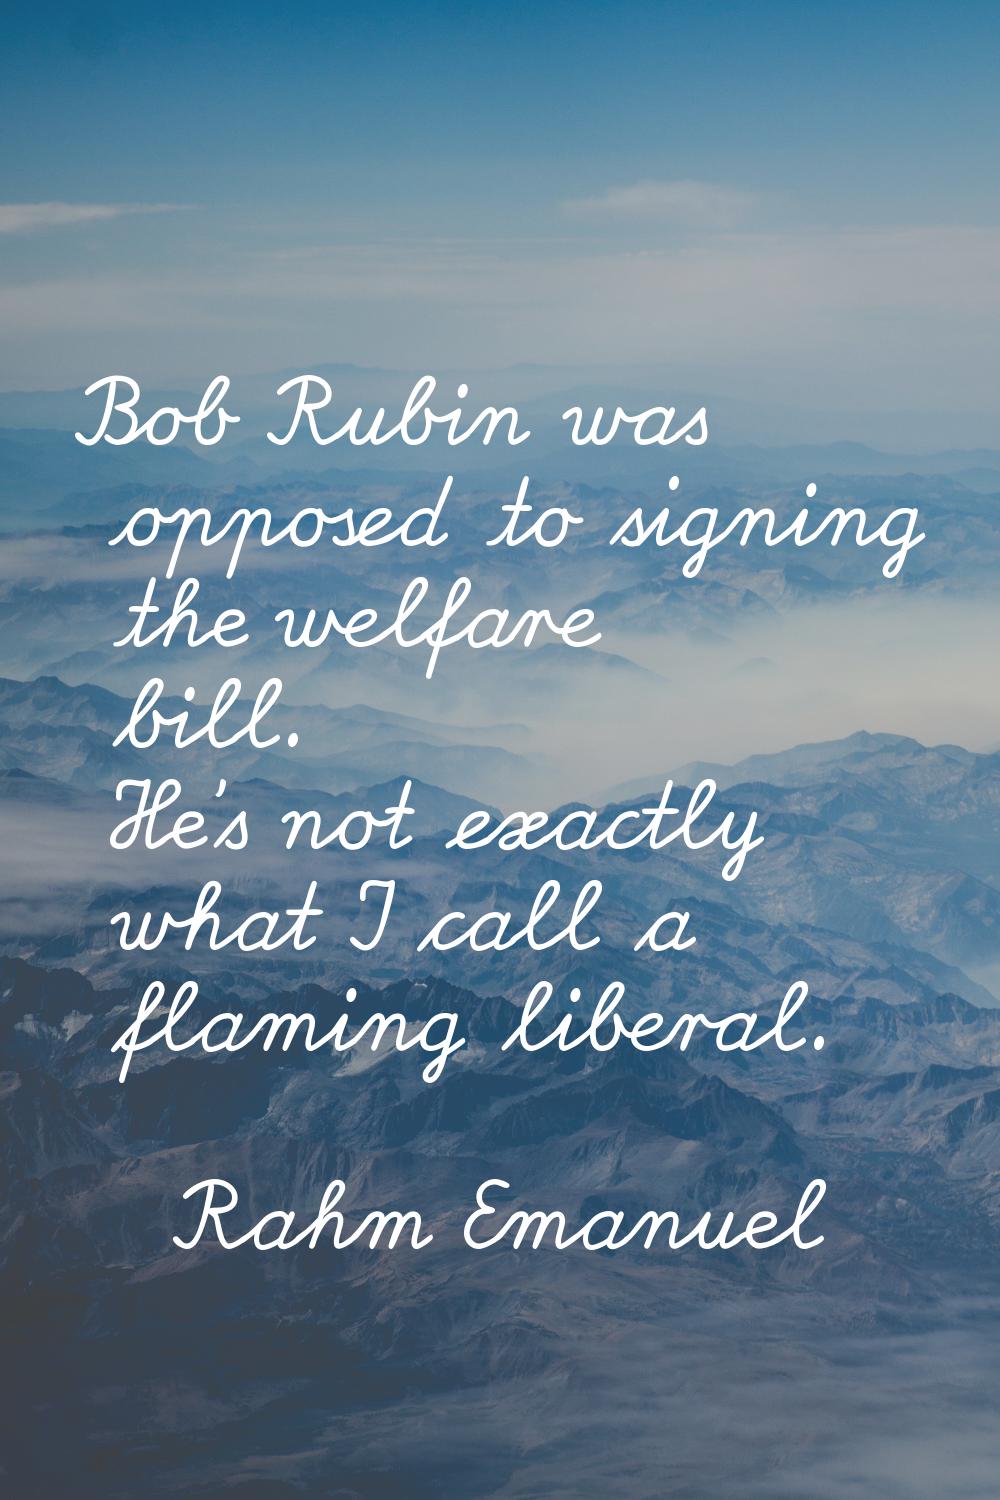 Bob Rubin was opposed to signing the welfare bill. He's not exactly what I call a flaming liberal.